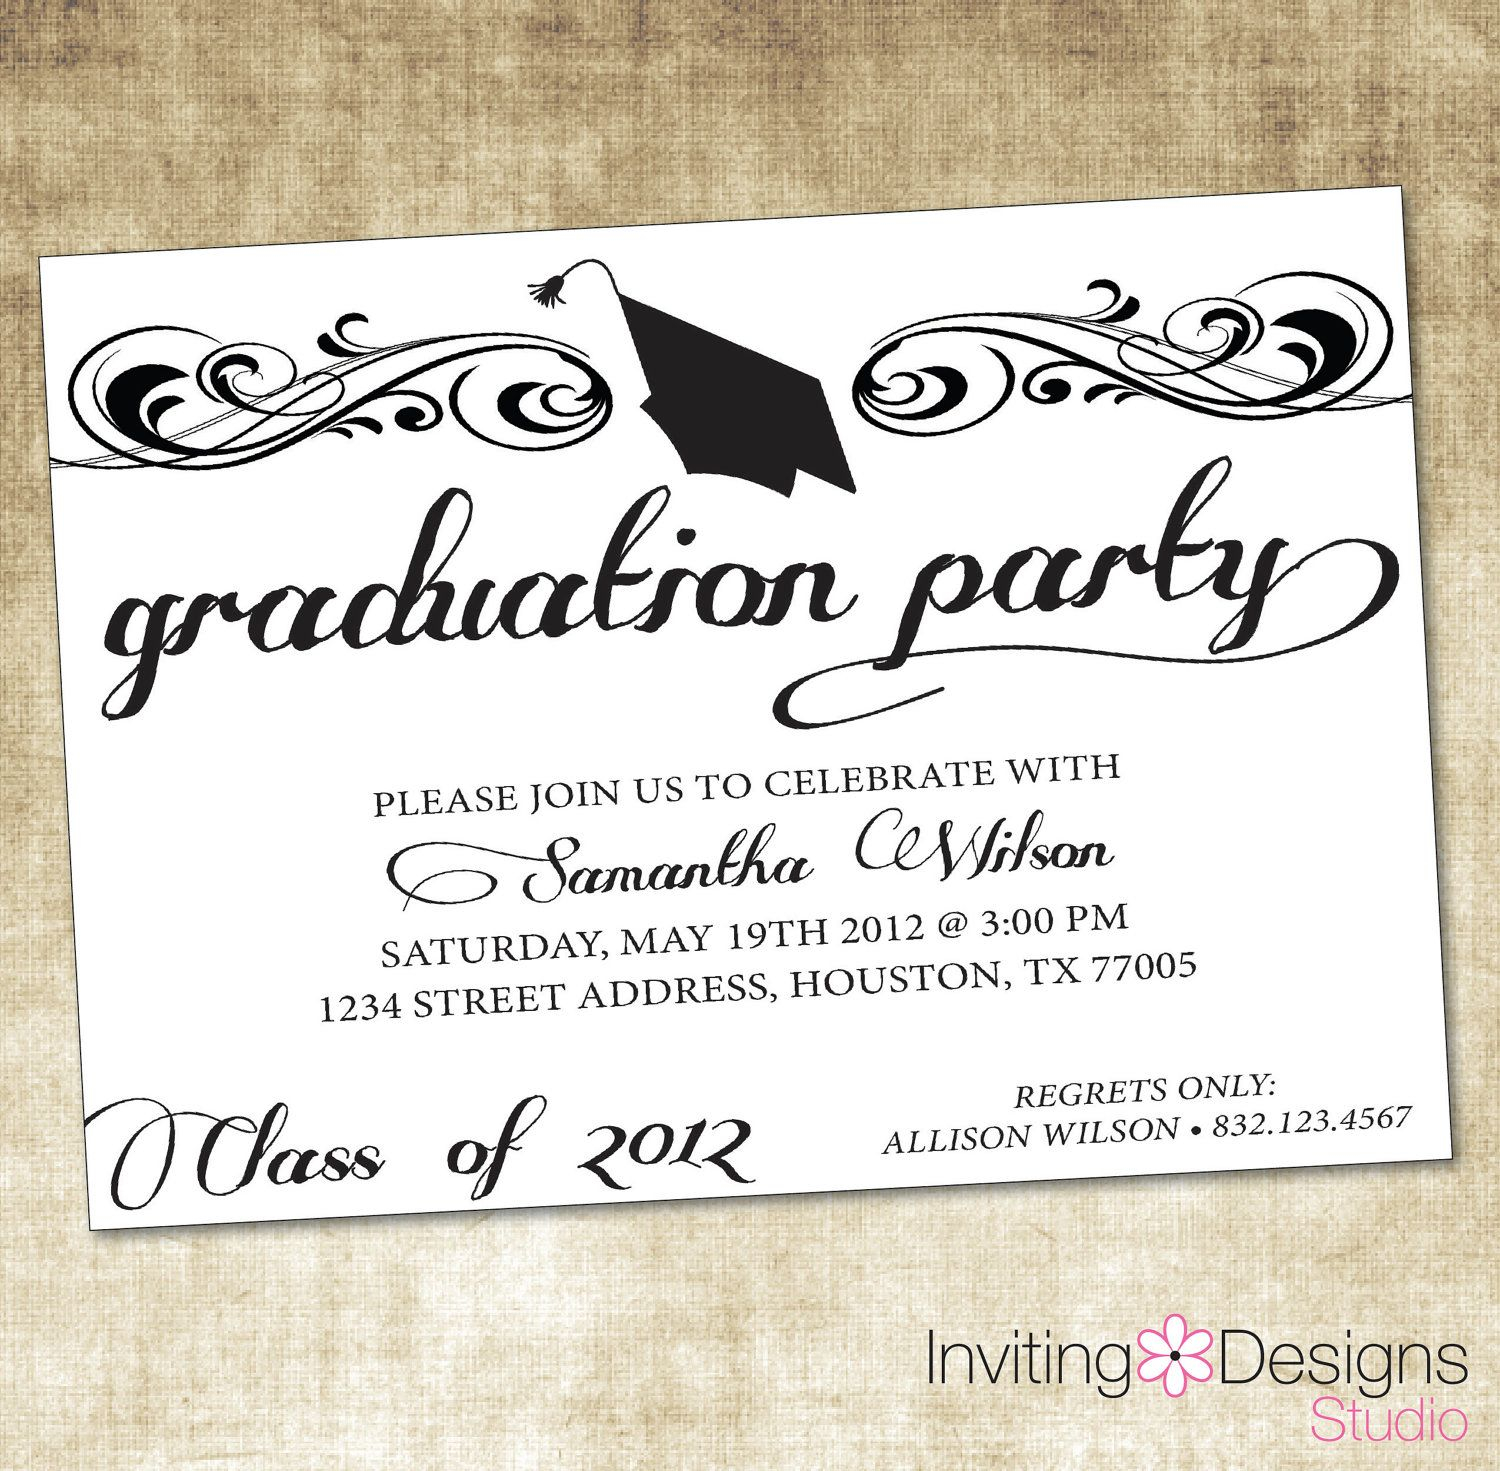 Graduate Invites Glamorous Grad Party Invites To Design Party throughout sizing 1500 X 1471